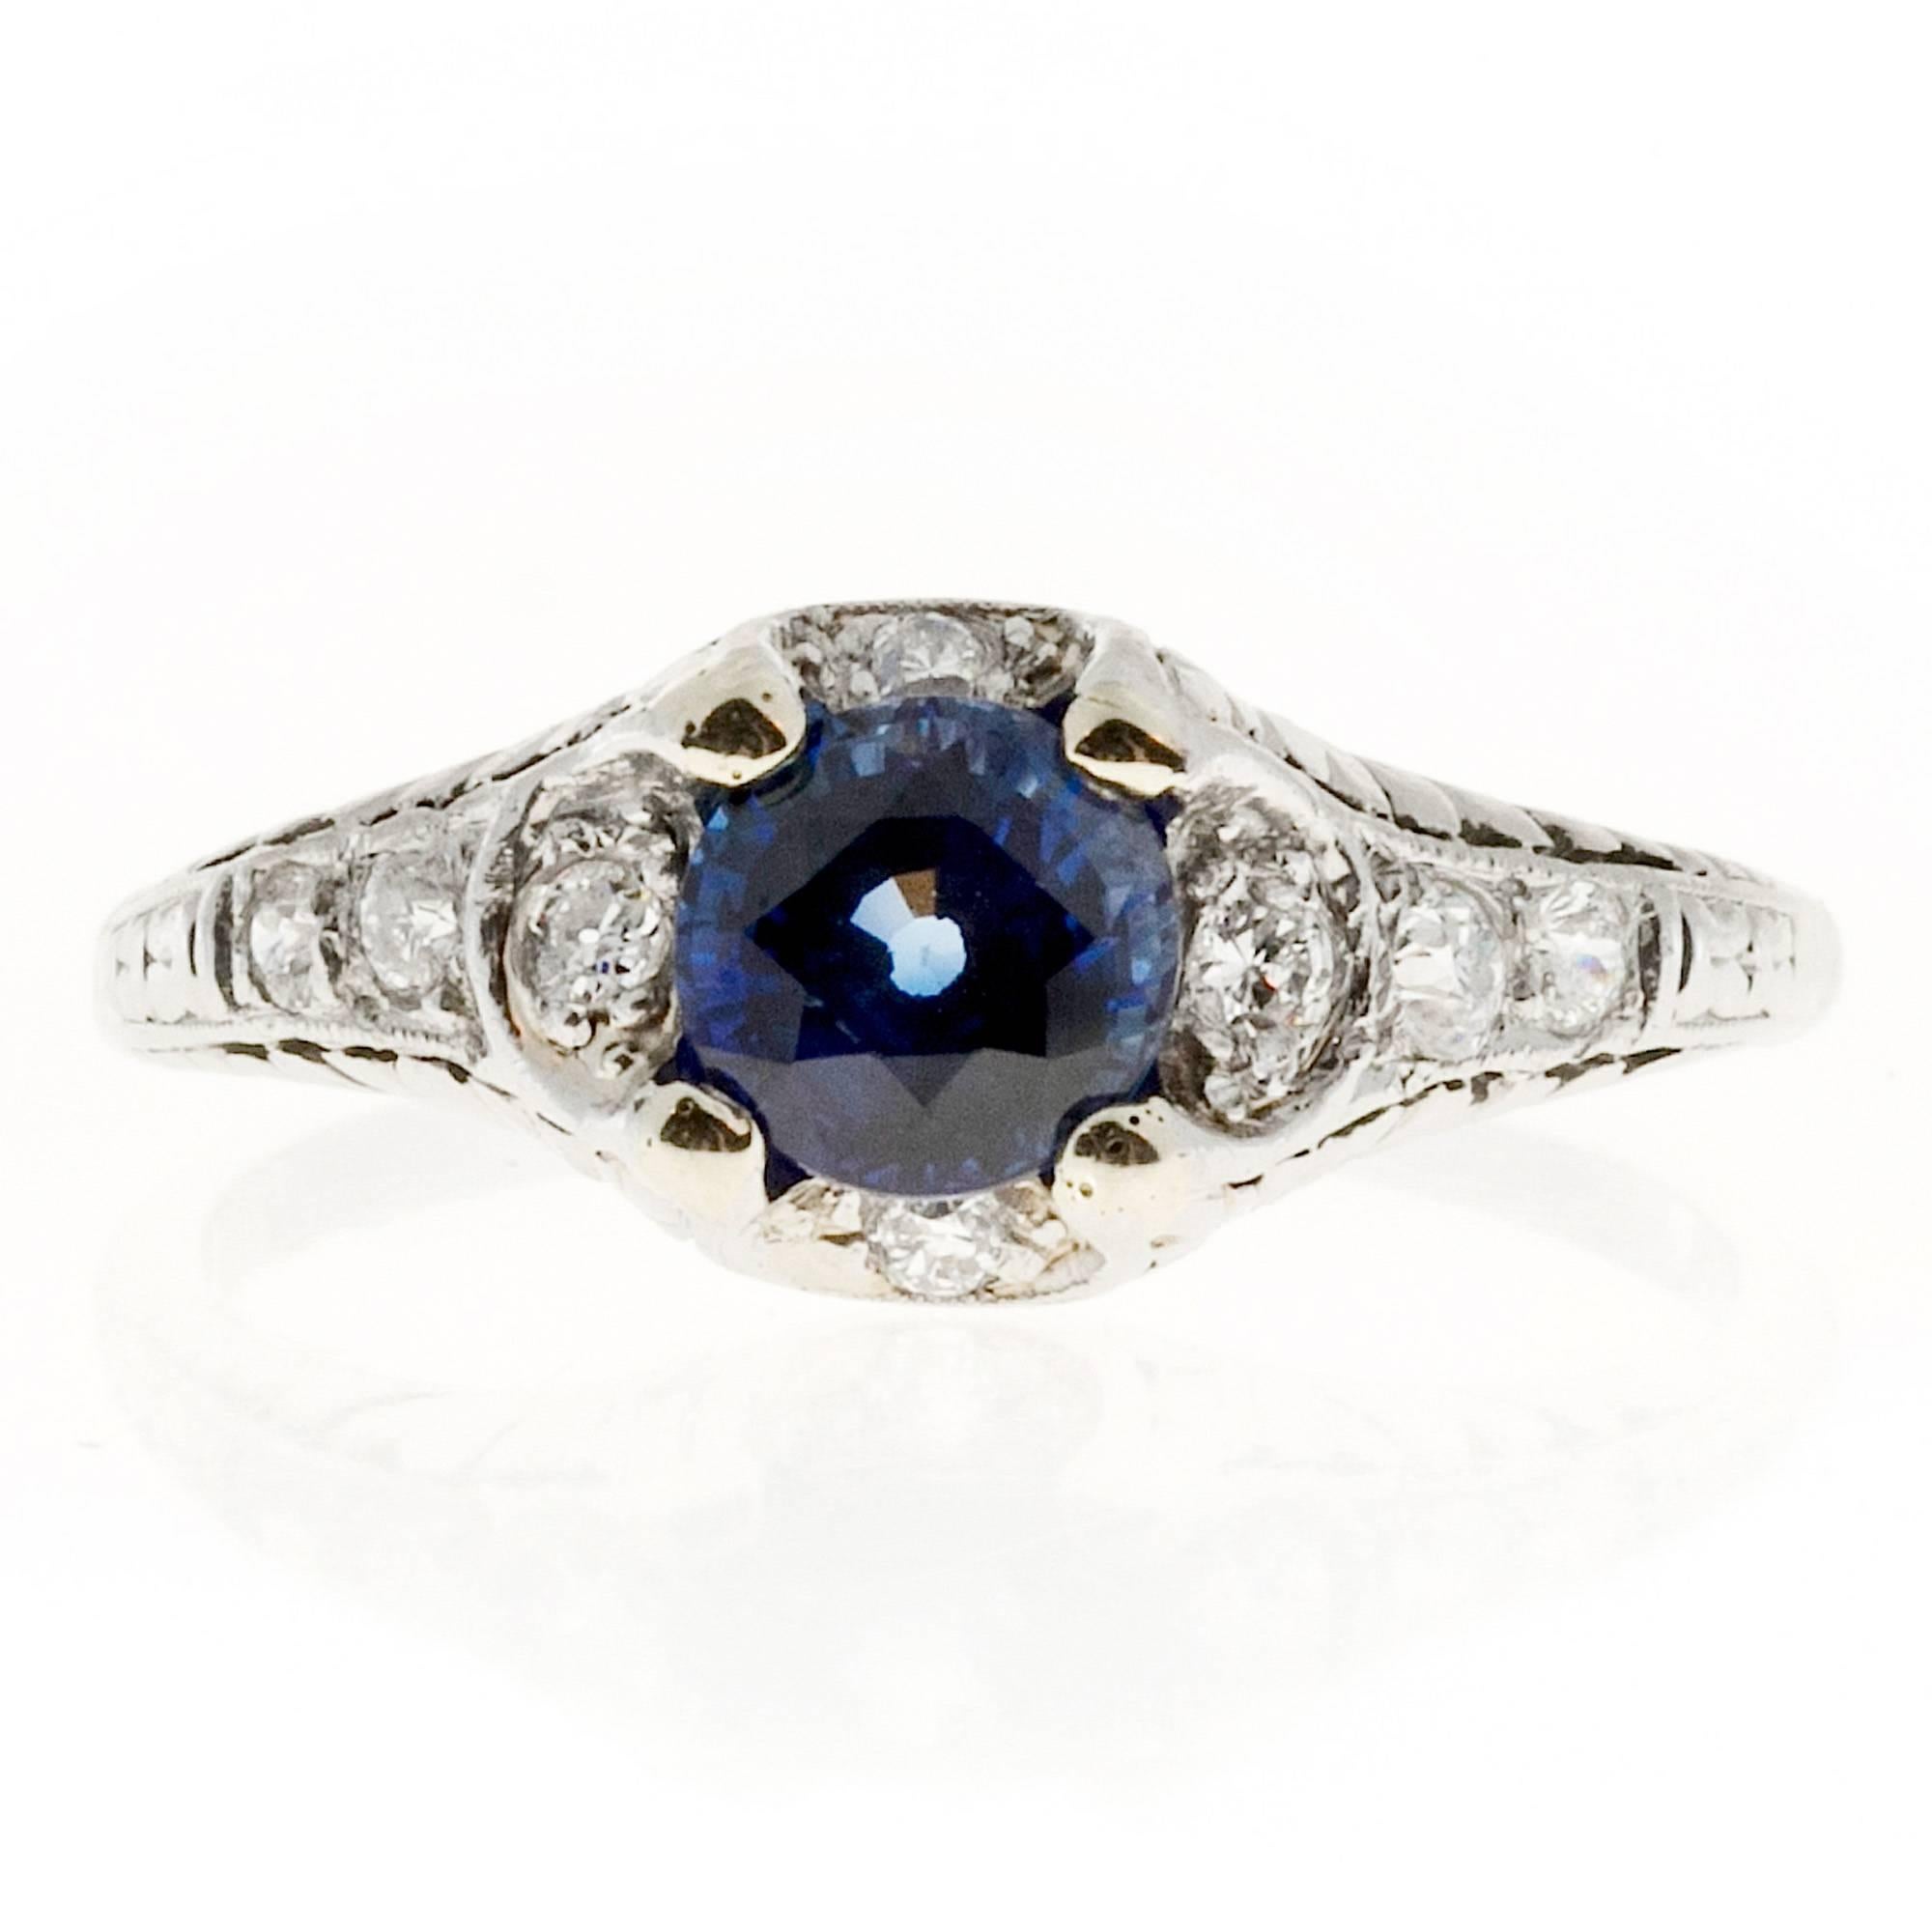 Handmade pierced engraved old cut sapphire and pave diamond engagement ring.  Circa 1910-1920.

1 round sapphire approx. total weight 1.05cts
8 round diamonds approx. total weight .14cts
Platinum
Tested Plat
4.3 grams
5/16 x ¾ inch
Size 7